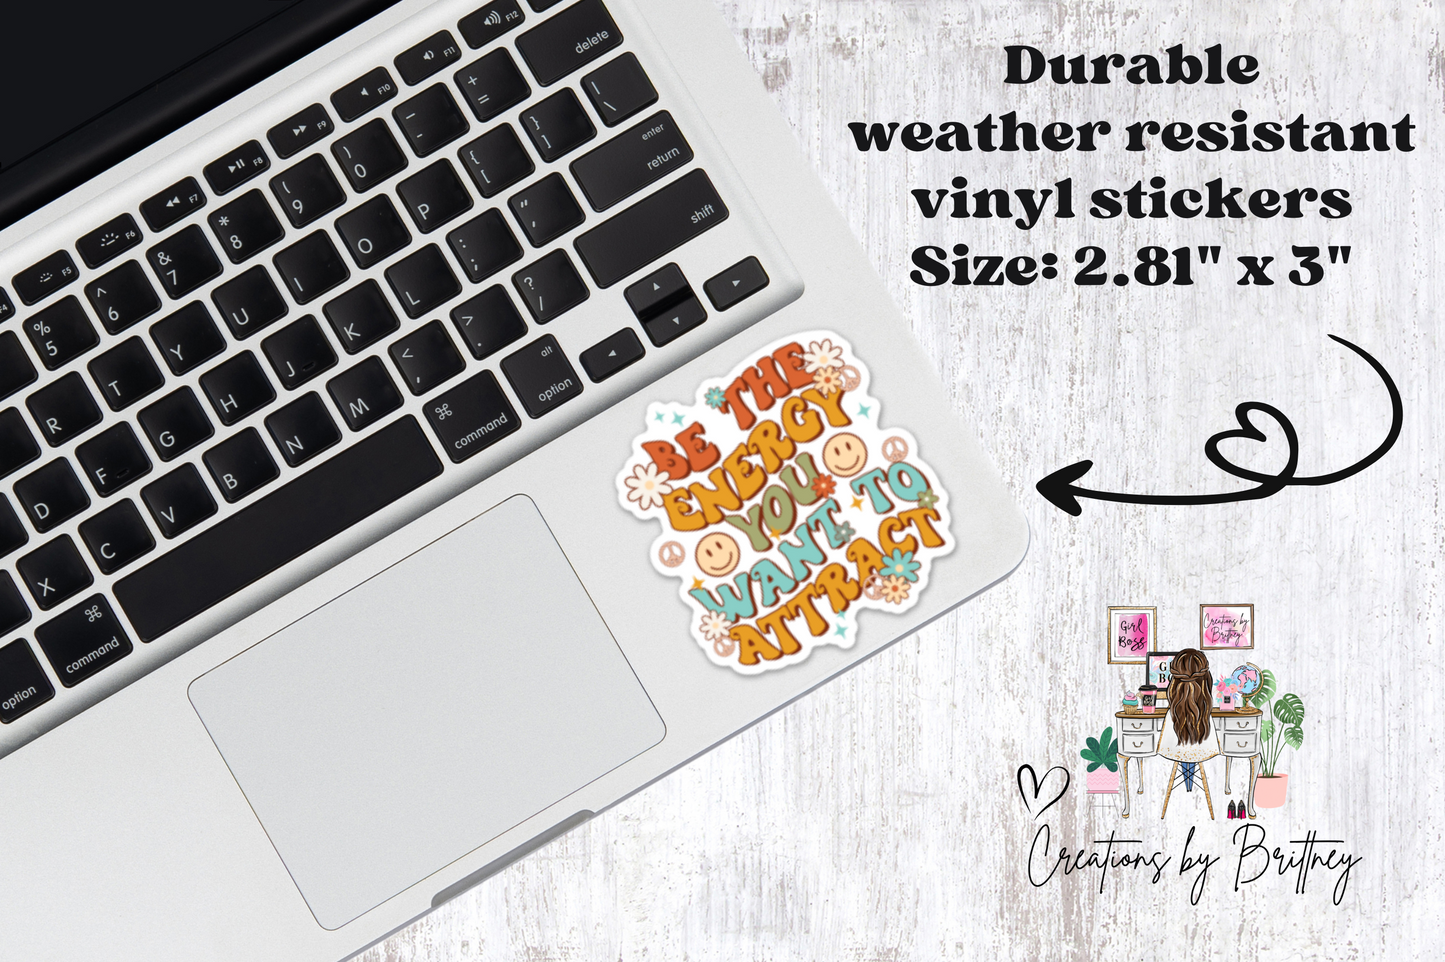 #55 Be the energy you want to attract Vinyl Sticker - New Release